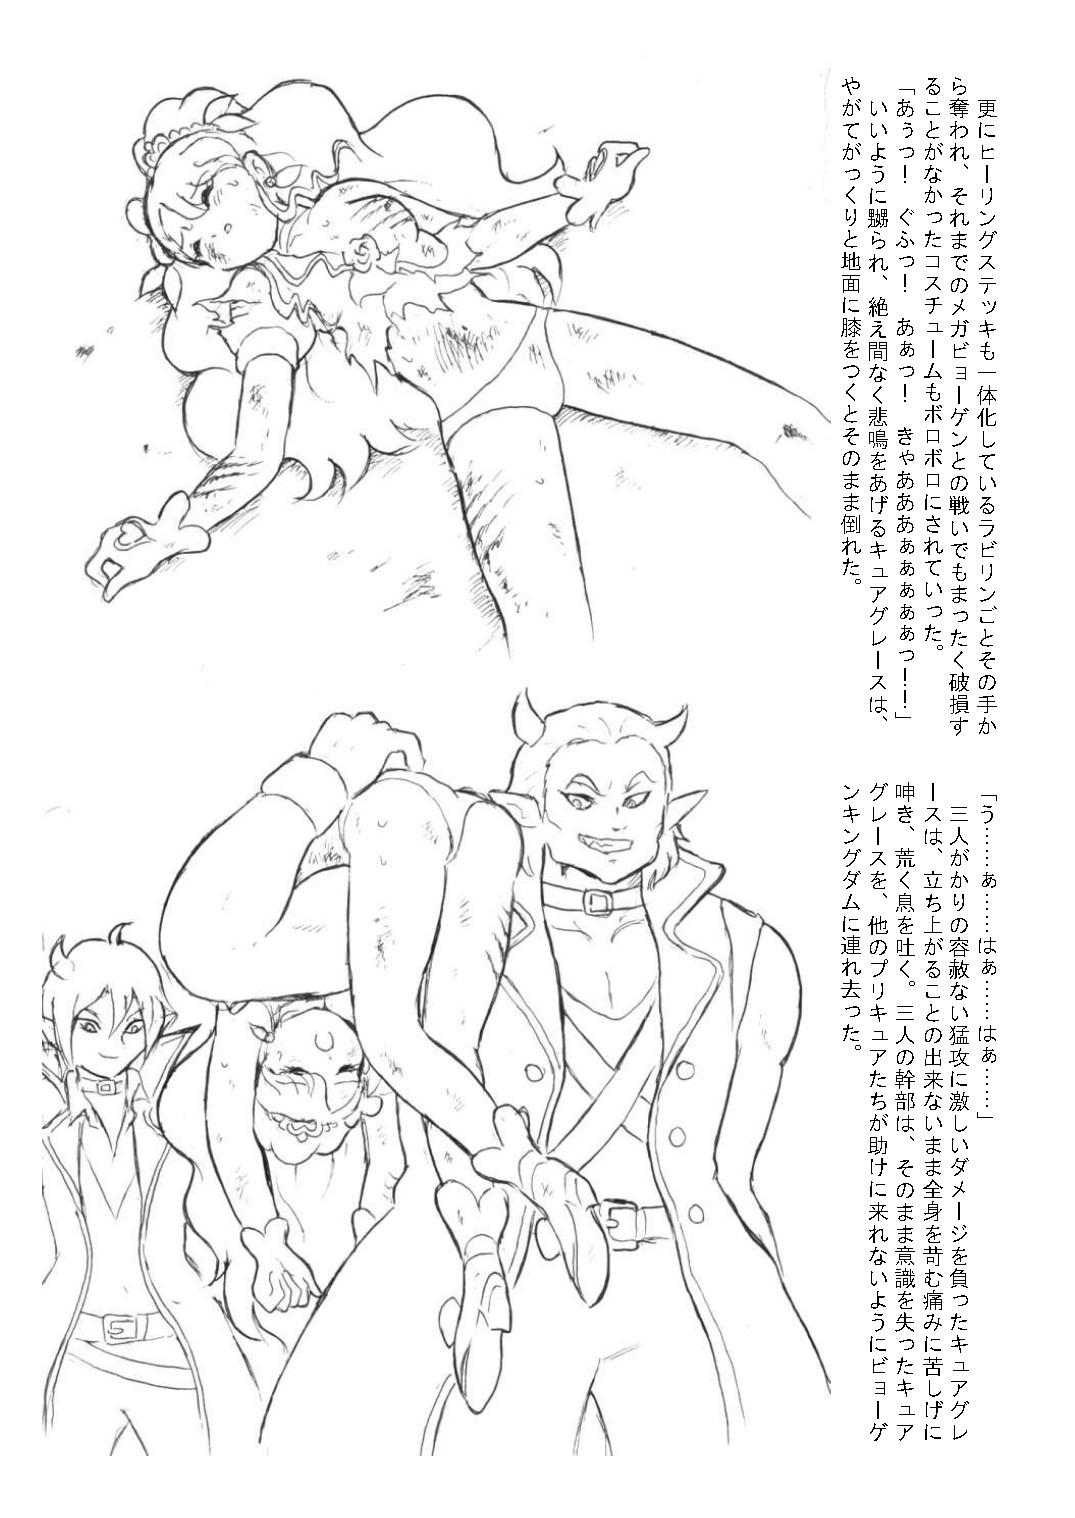 Sucking Grace Hunting - Healin good precure Breasts - Page 7